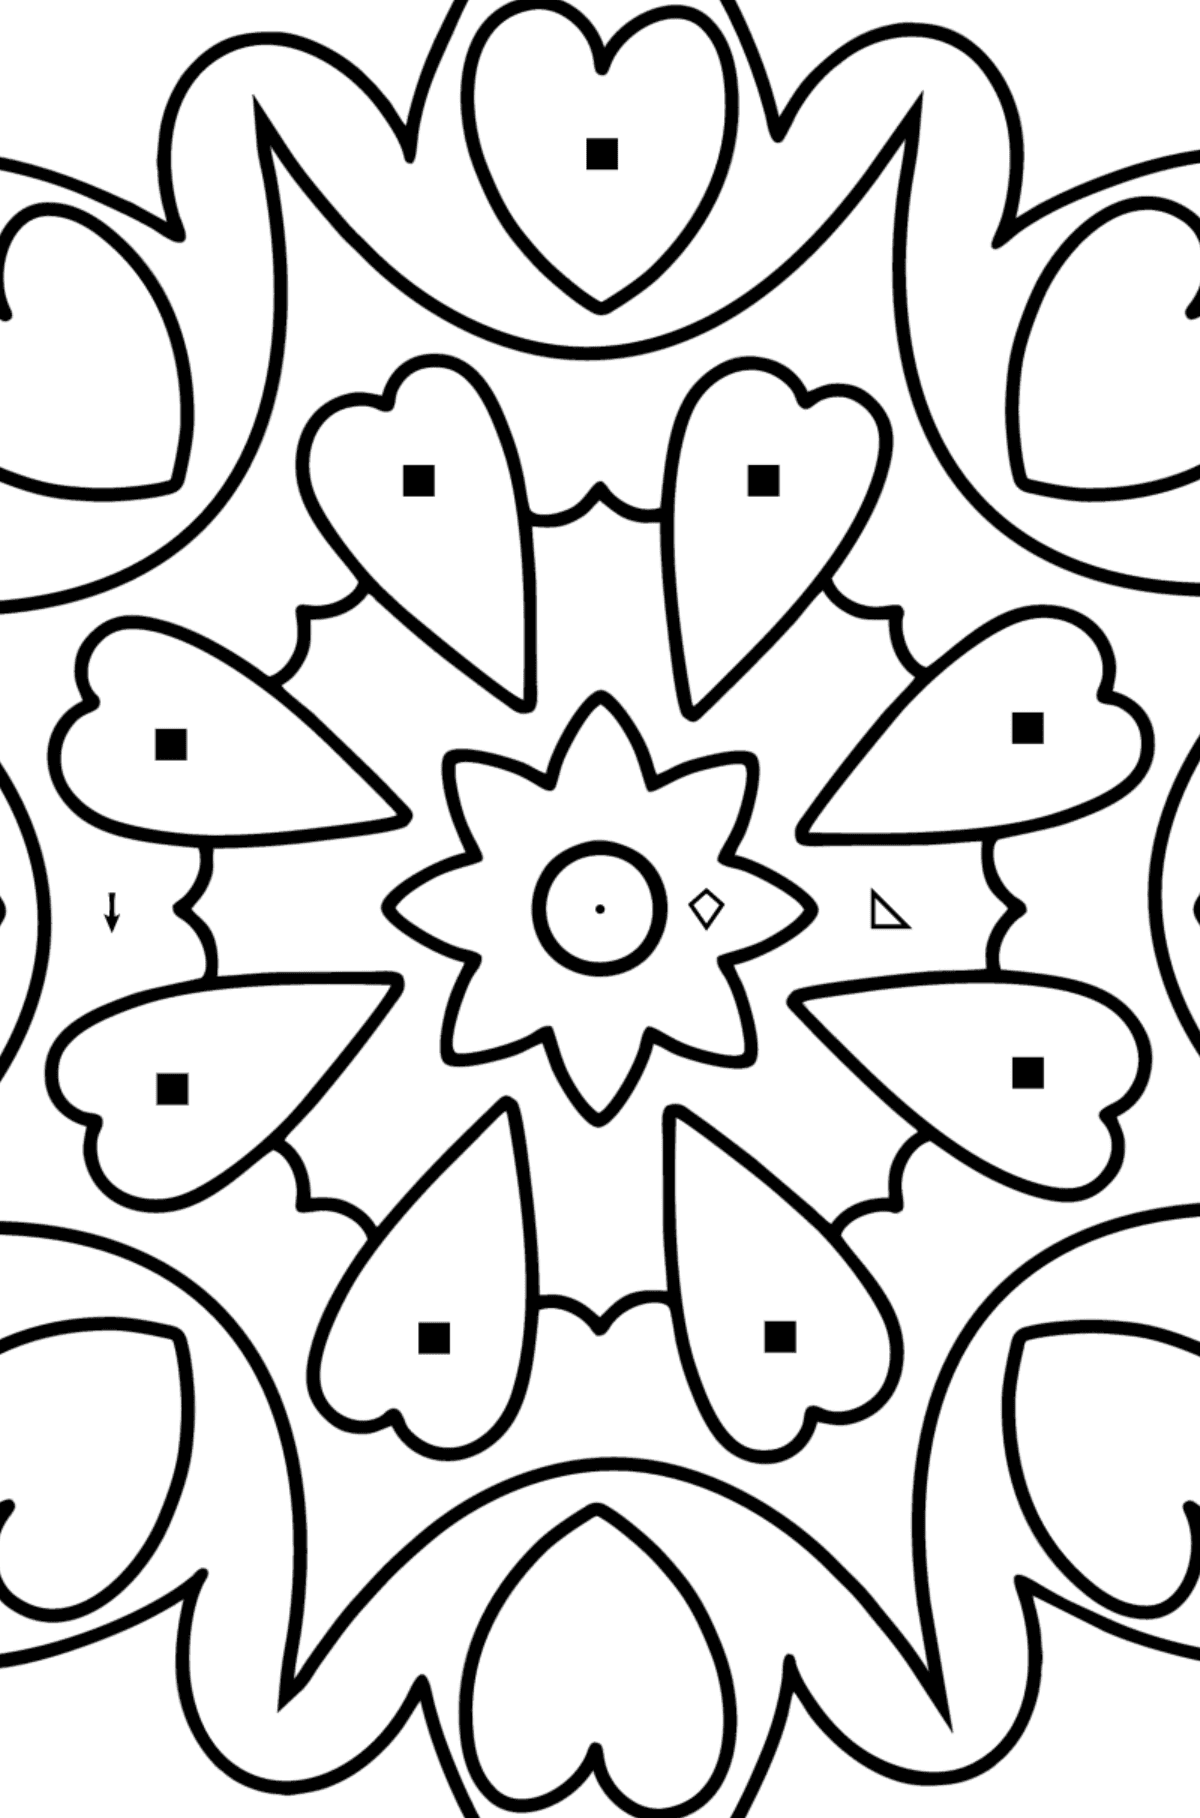 Mandala coloring page - 21 elements - Coloring by Symbols and Geometric Shapes for Kids